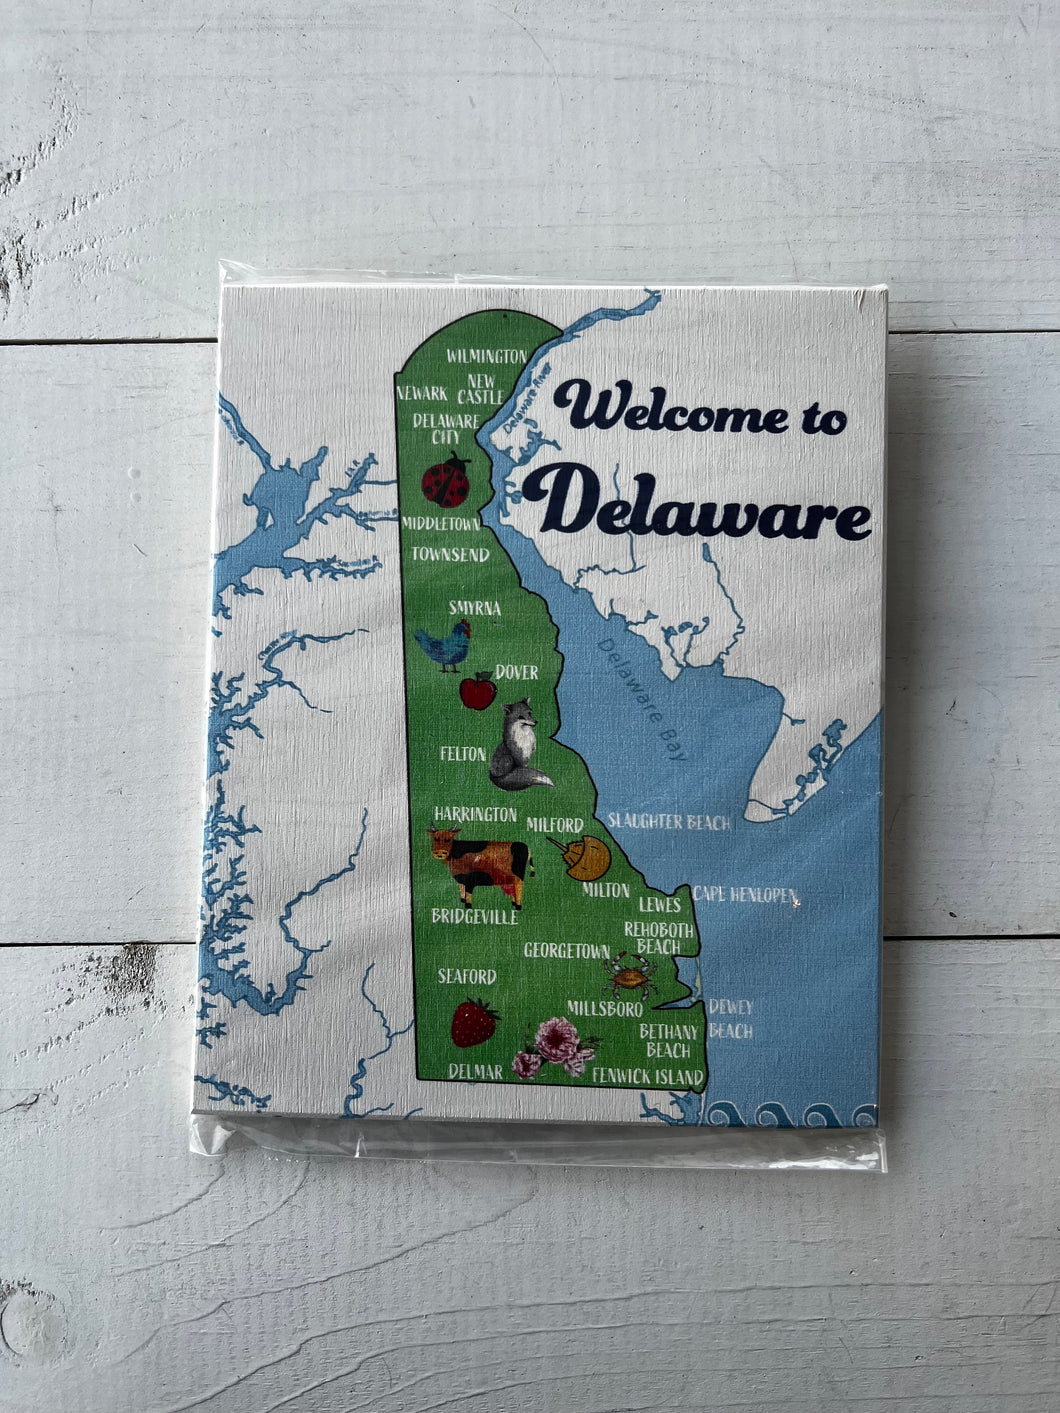 WELCOME TO DELAWARE SIGN